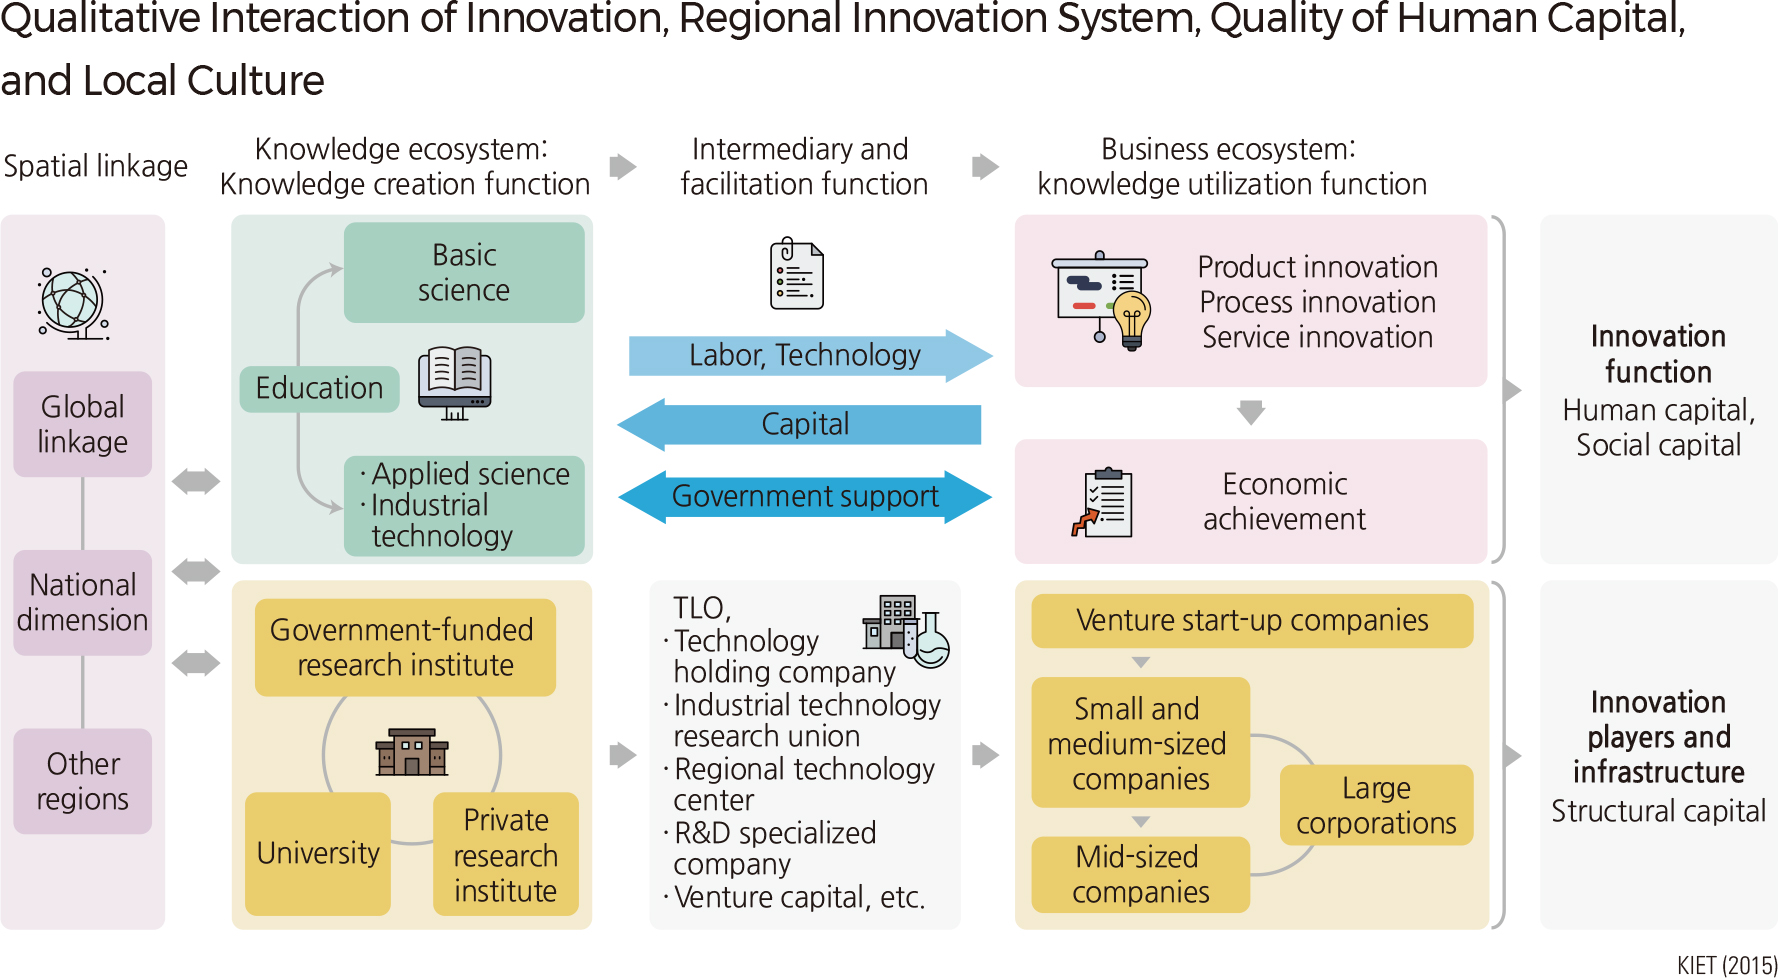 Qualitative Interaction of Innovation, Regional Innovation System, Quality of Human Capital, and Local Culture